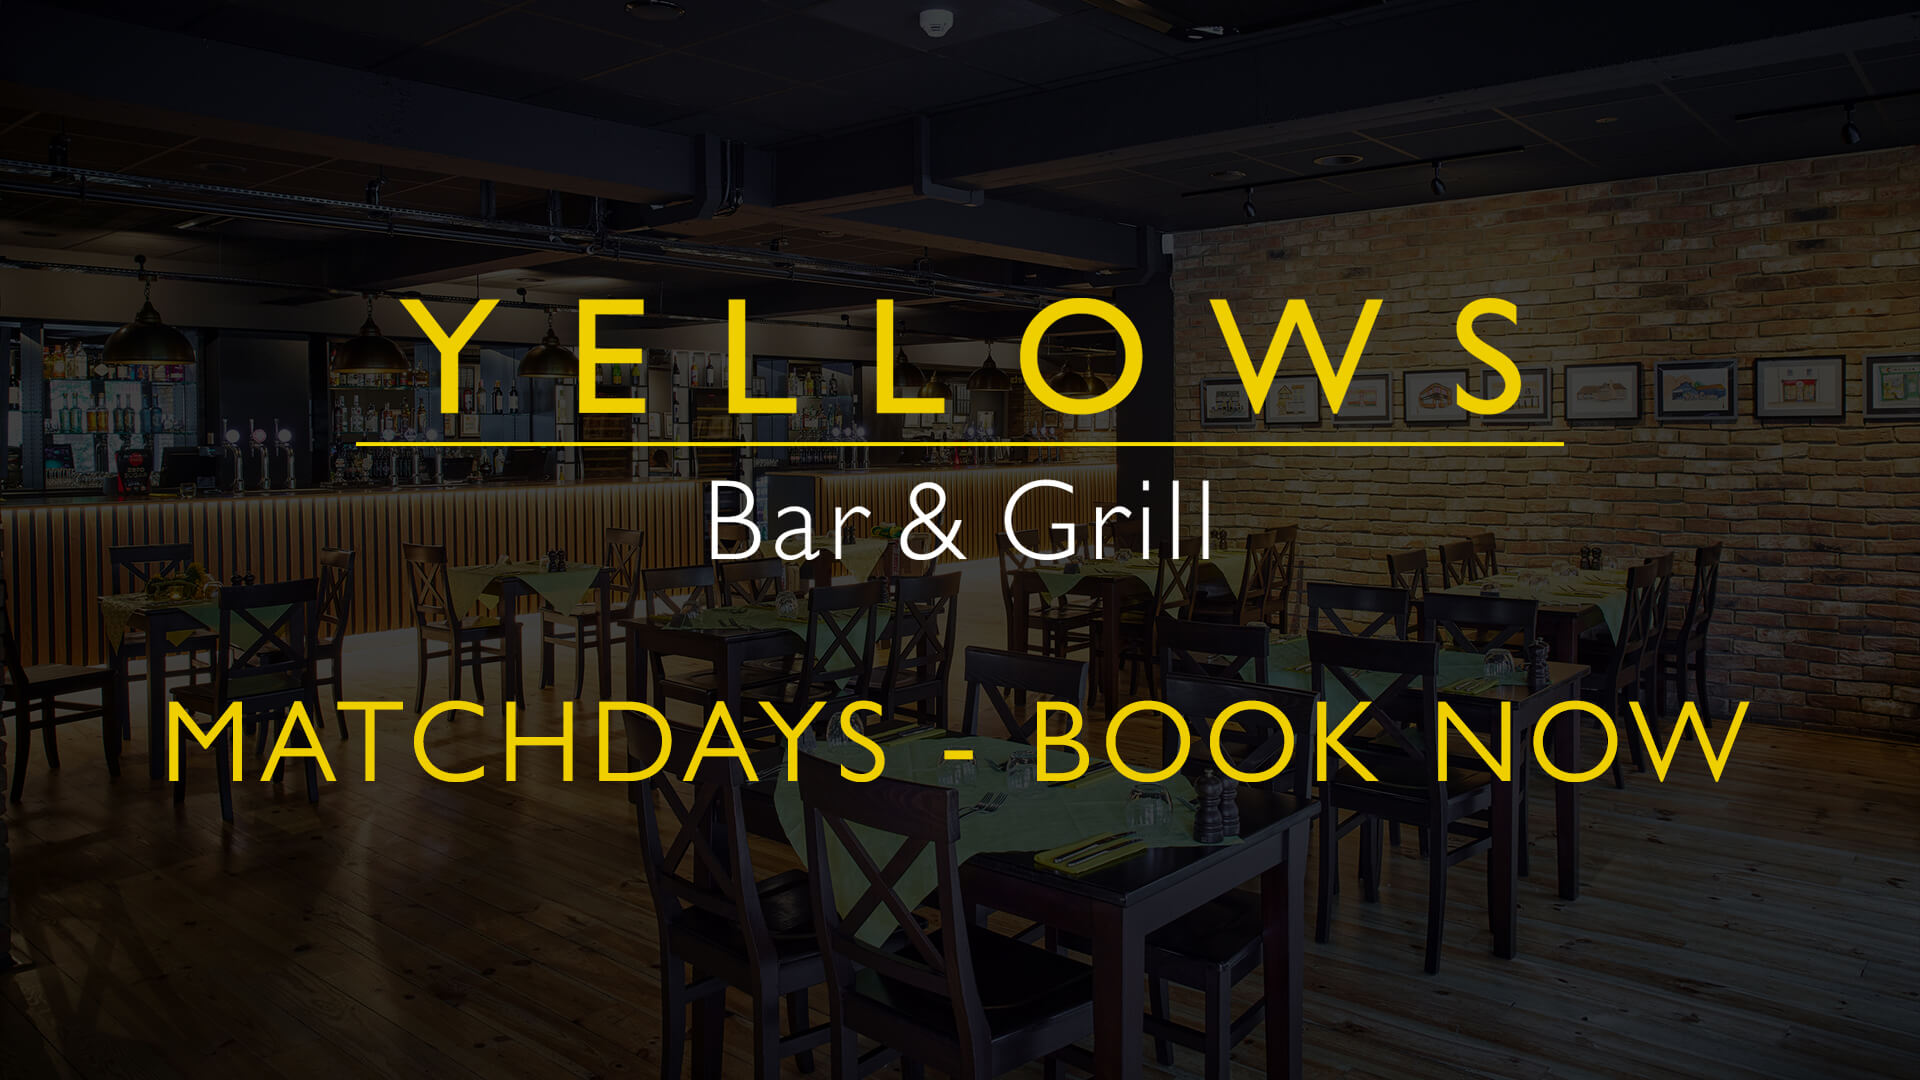 Yellows Bar and Grill. Book now